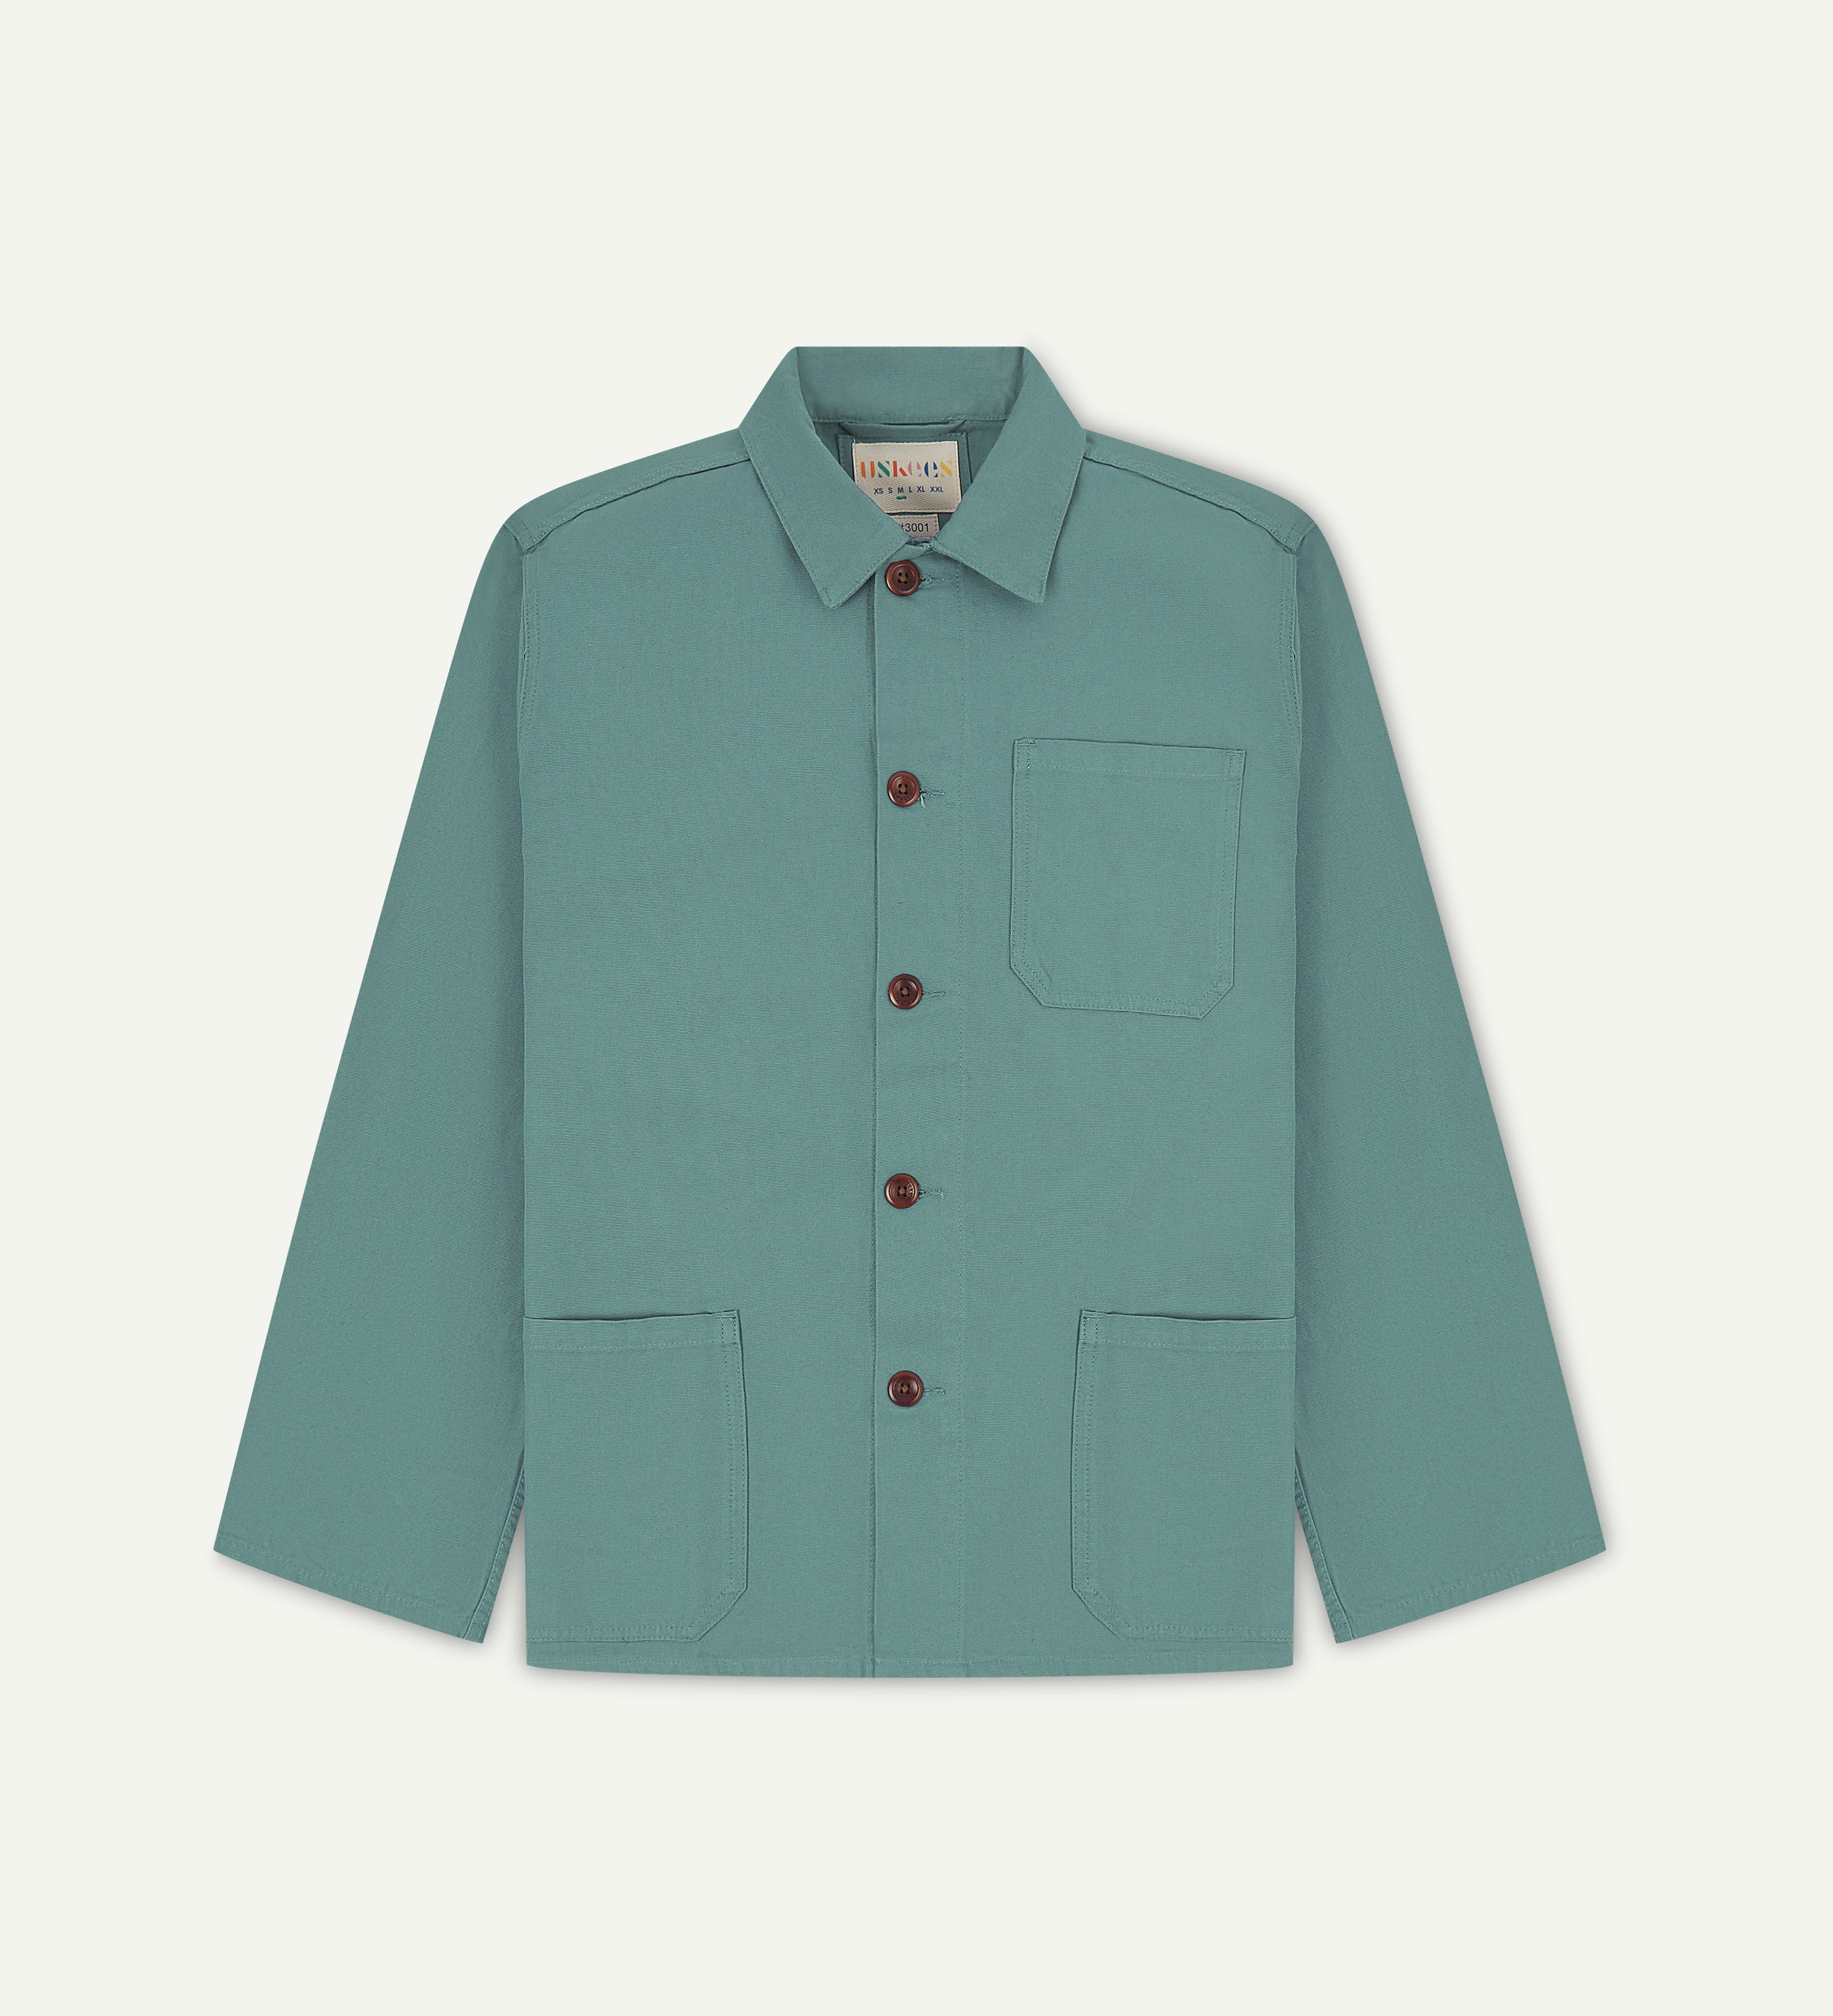 Flat shot of the front of eucalyptus green men's overshirt with buttons done up and showing uskees neck label